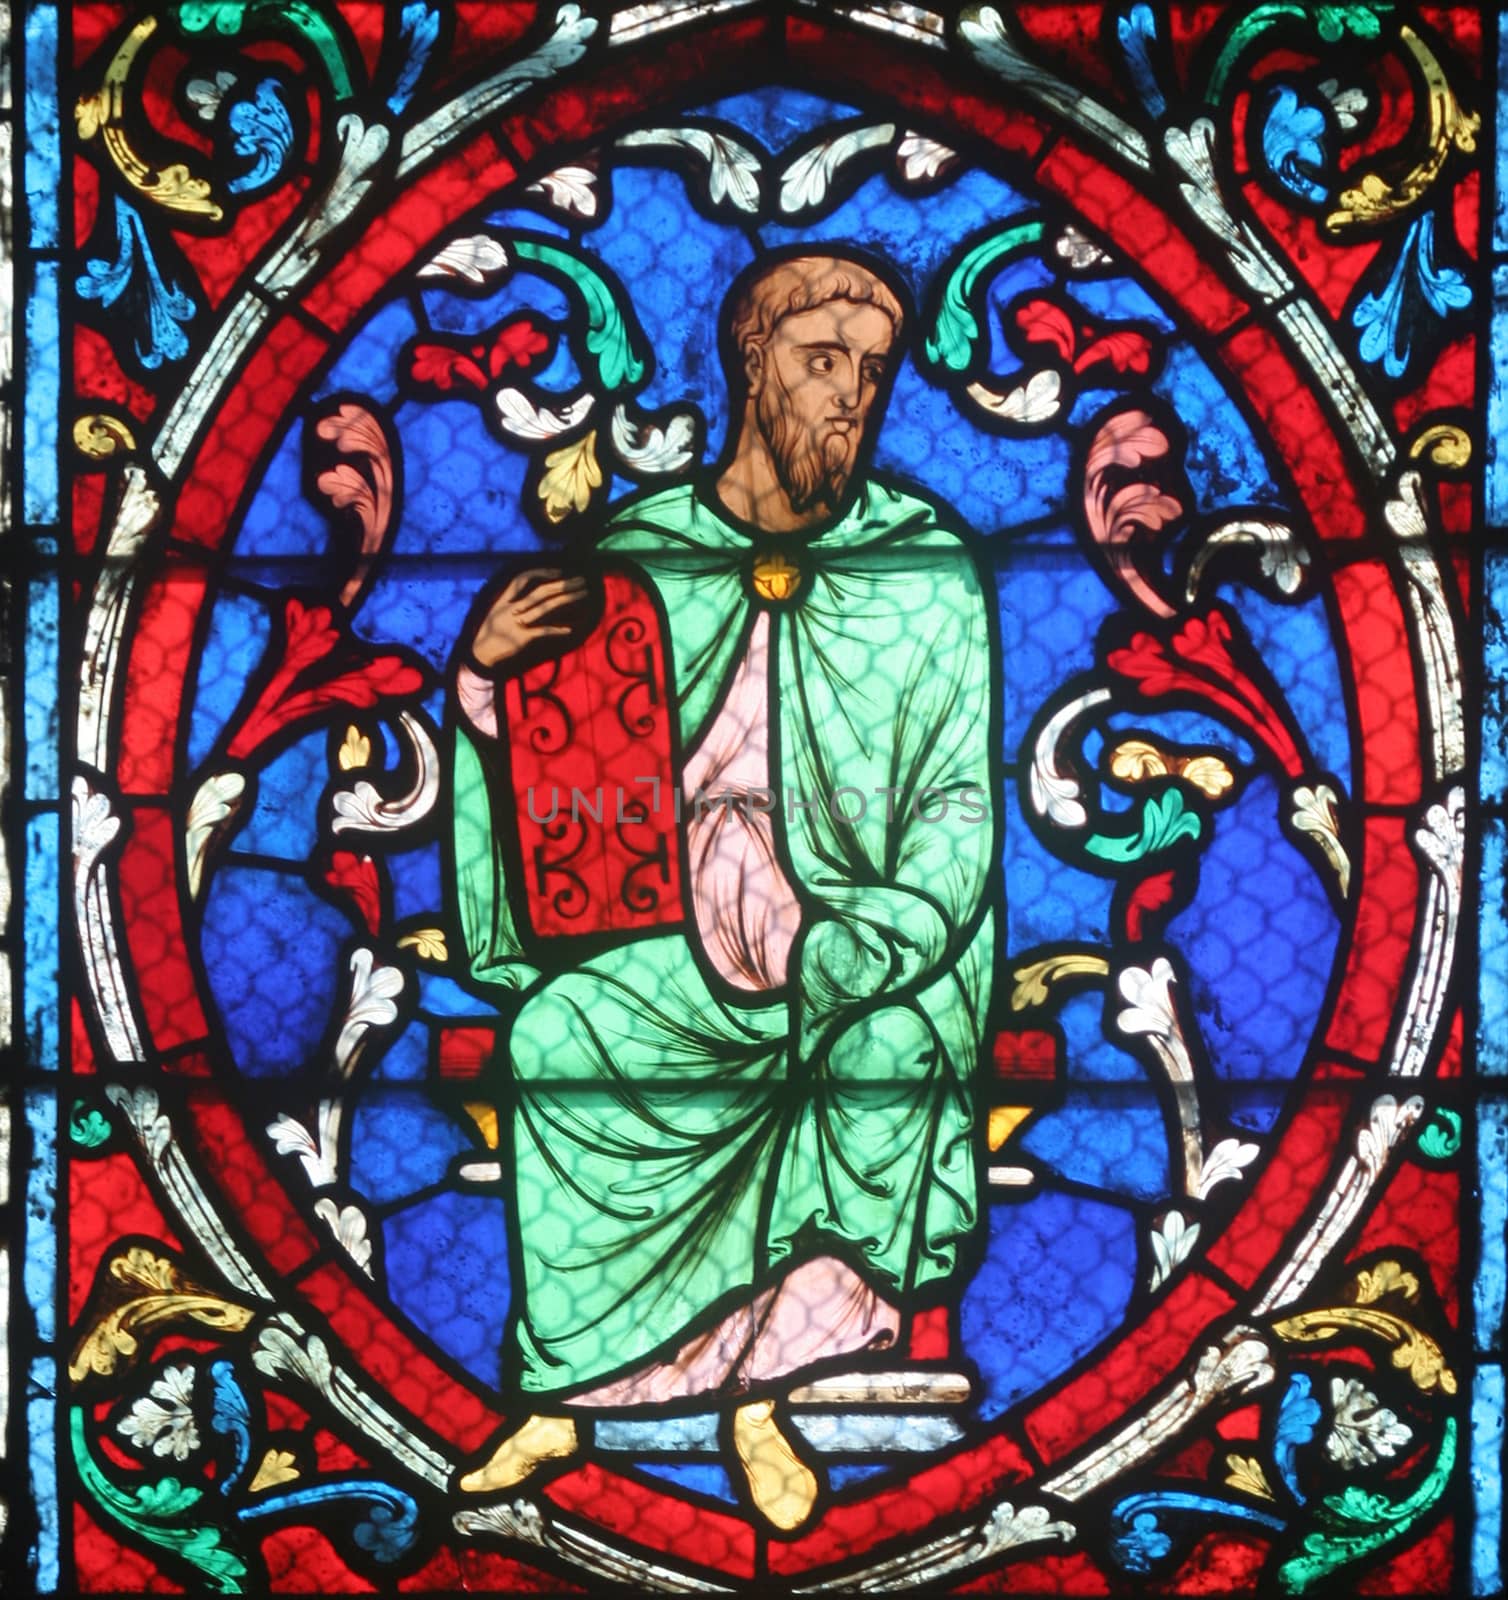 Colorful stained glass window in Cathedral Notre Dame de Paris